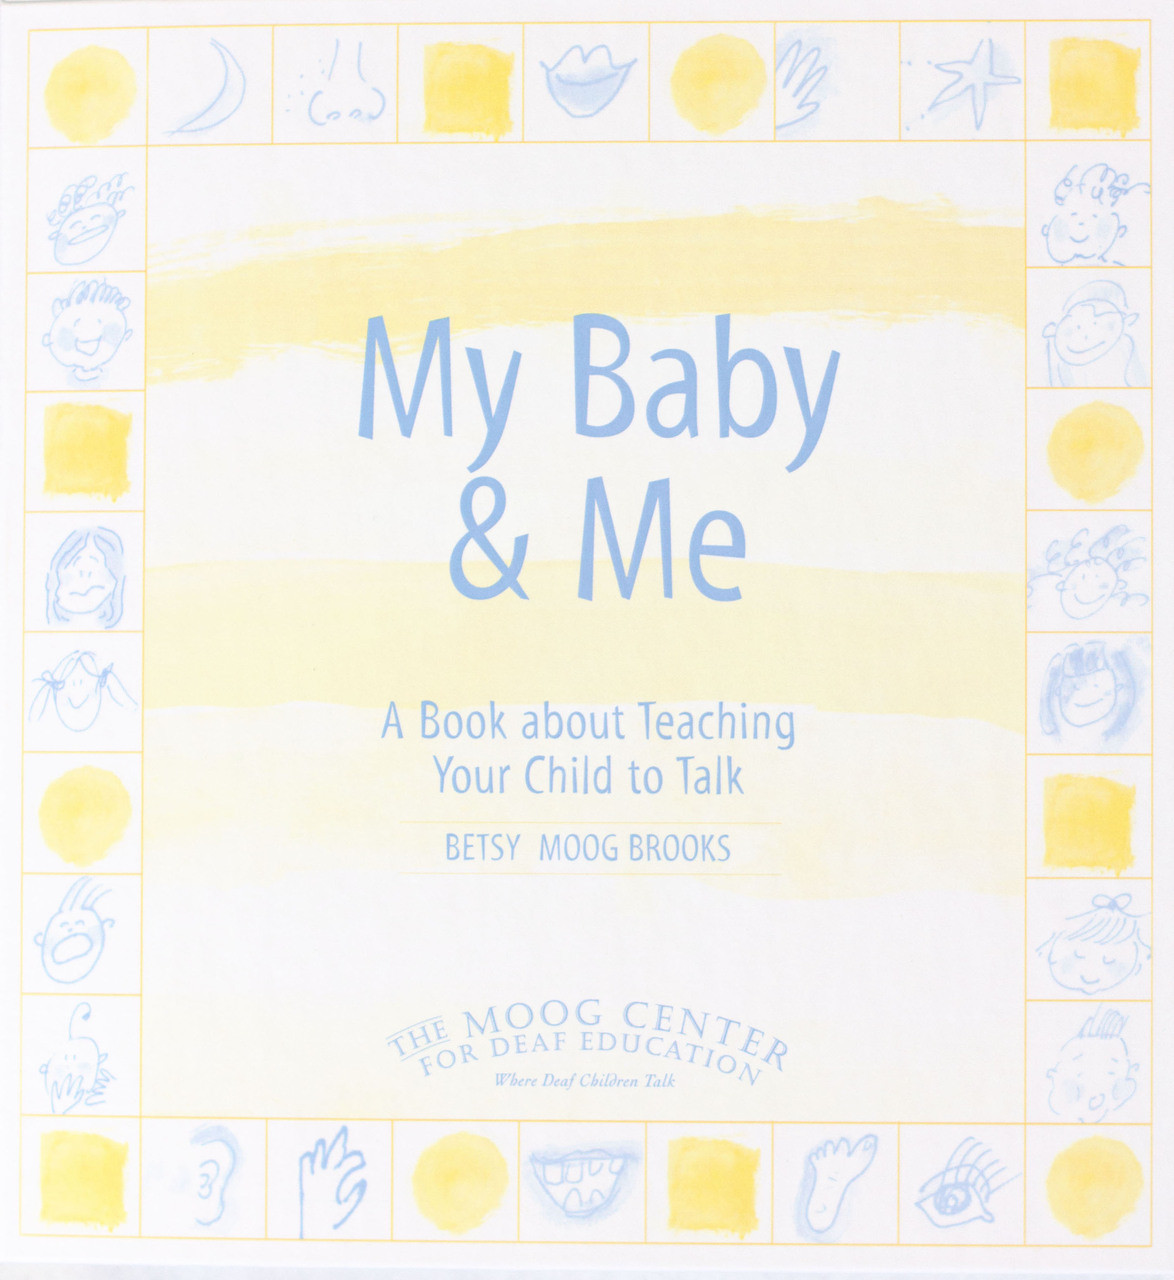 The cover of the book "My Baby & Me: A Book about Teaching Your Child to Talk" features the title in blue in the center on a white and yellow striped background. A border of illustrated faces of children and a variety of body parts surround the text.